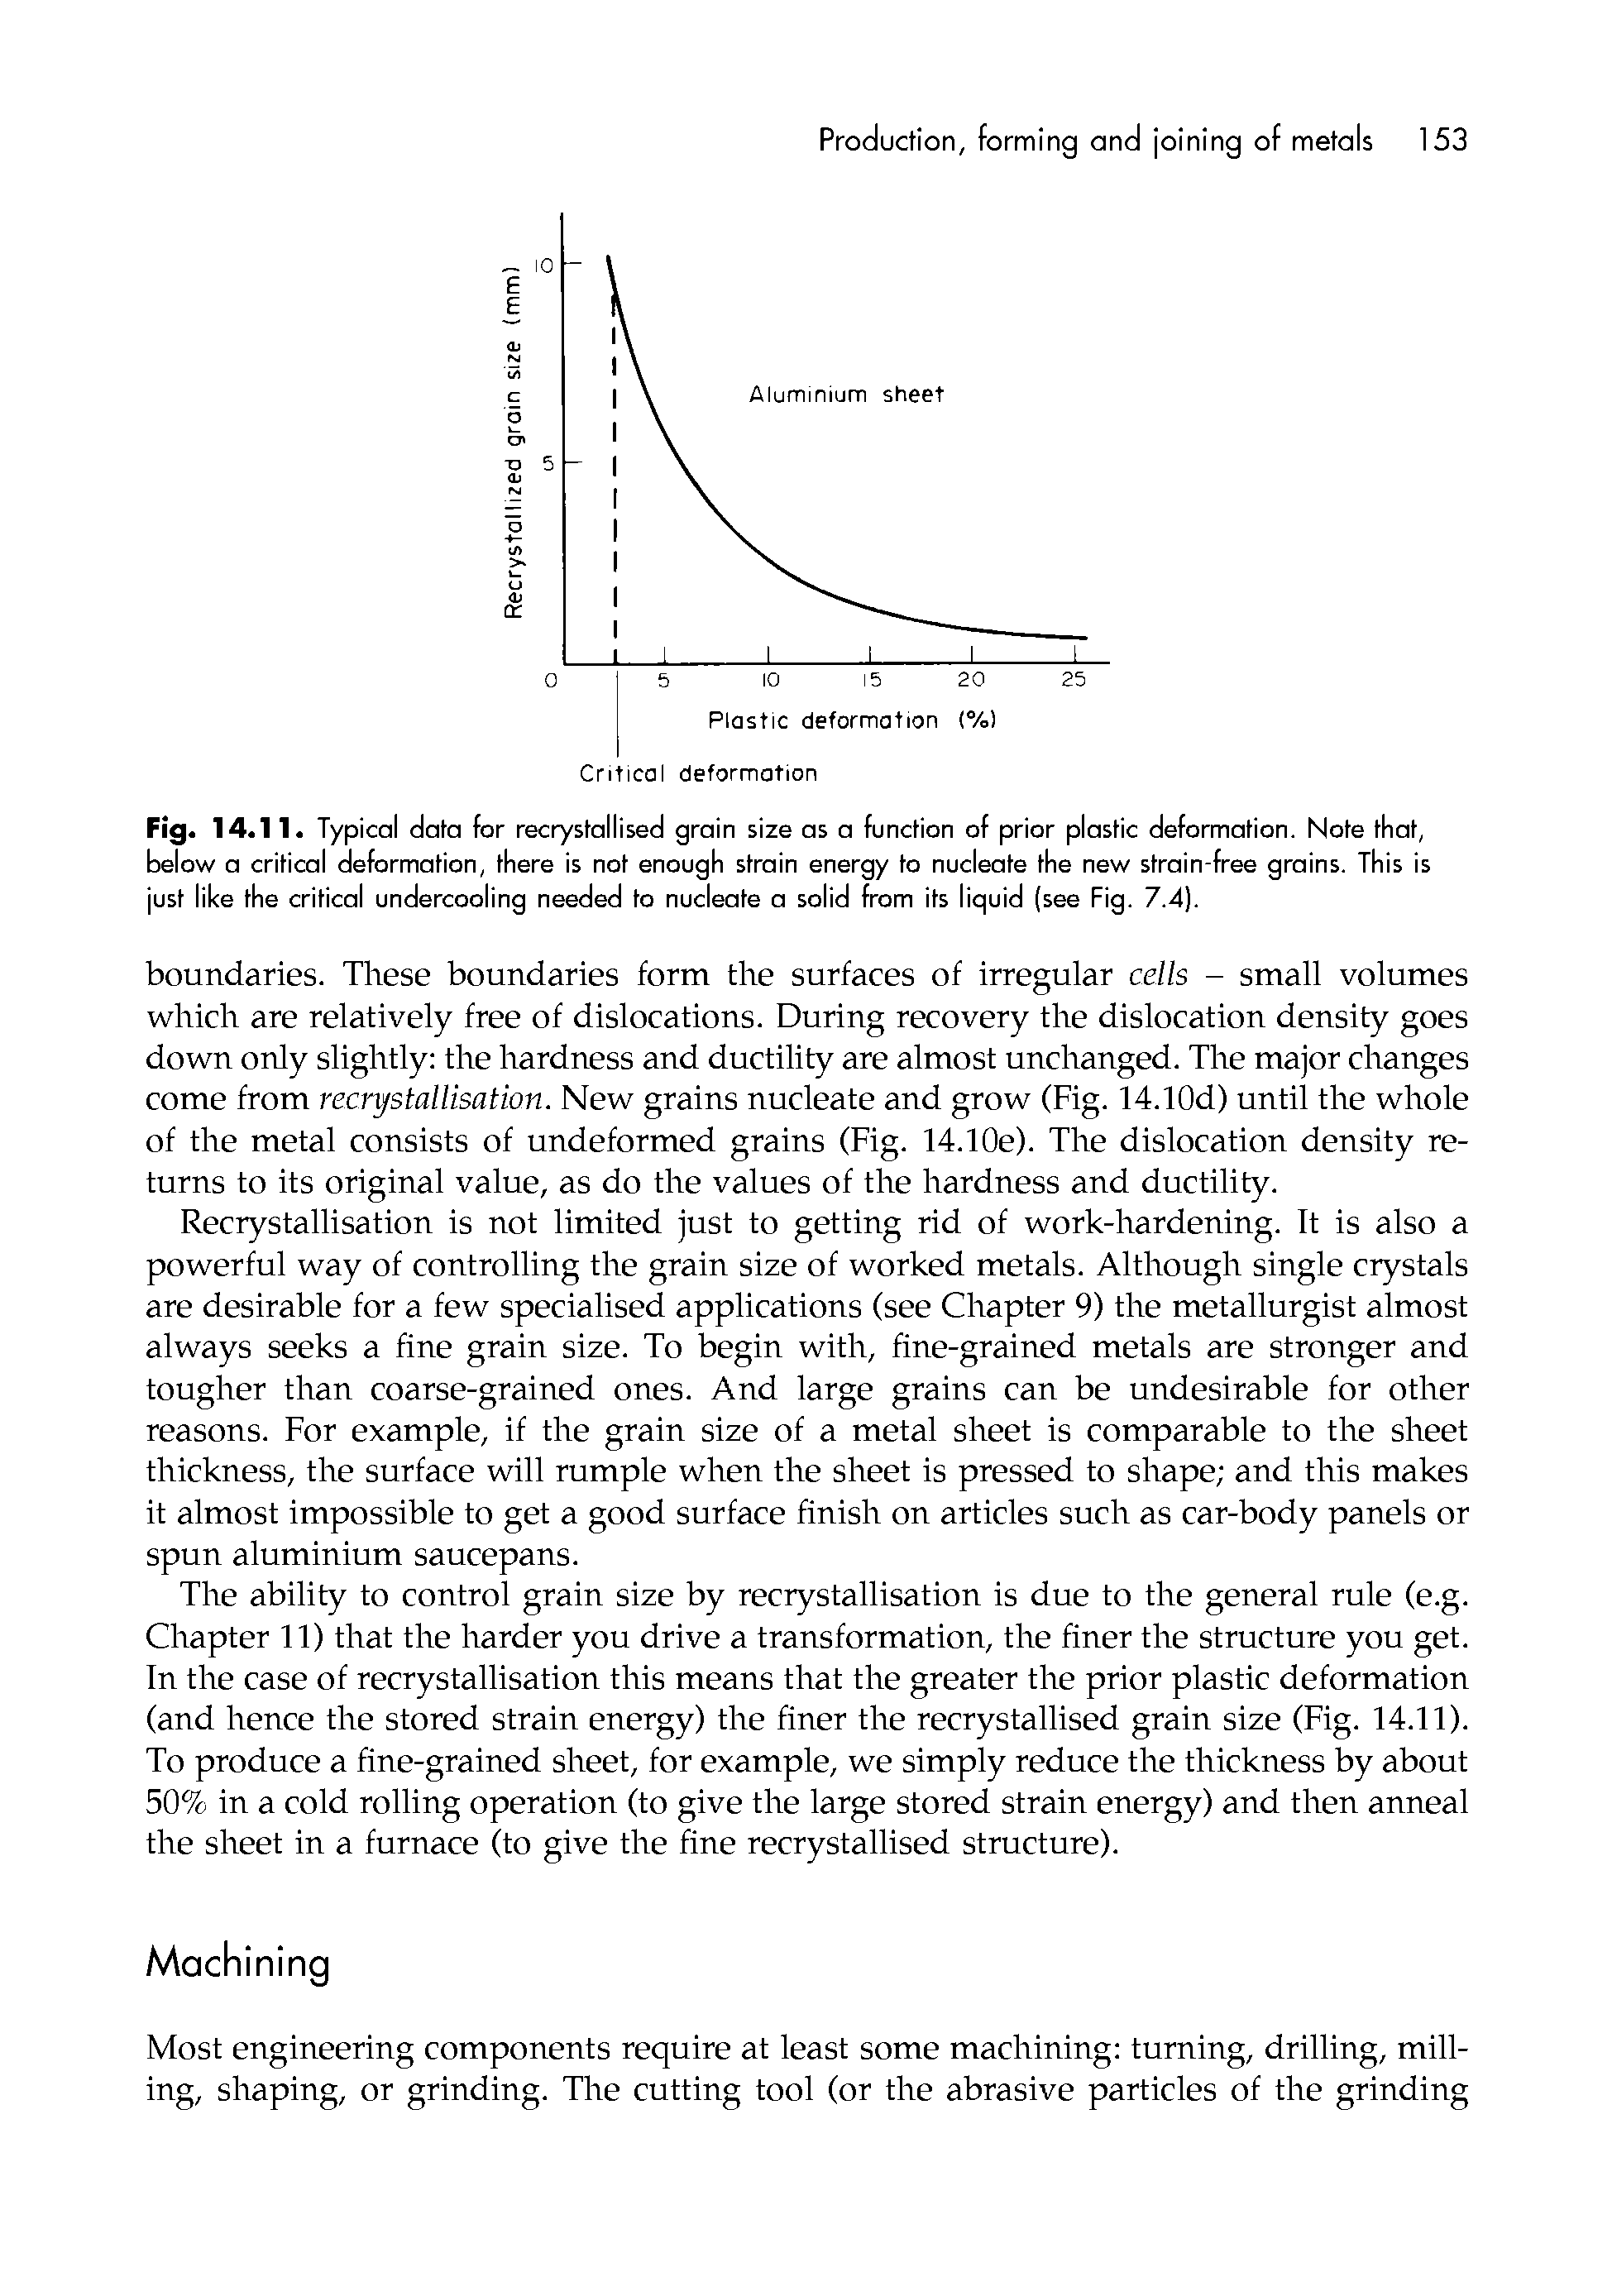 Fig. 14.11. Typical data for recrystallised grain size as a function of prior plastic deformation. Note that, below a critical deformation, there is not enough strain energy to nucleate the new strain-free grains. This is just like the critical undercooling needed to nucleate a solid from its liquid (see Fig. 7.4).